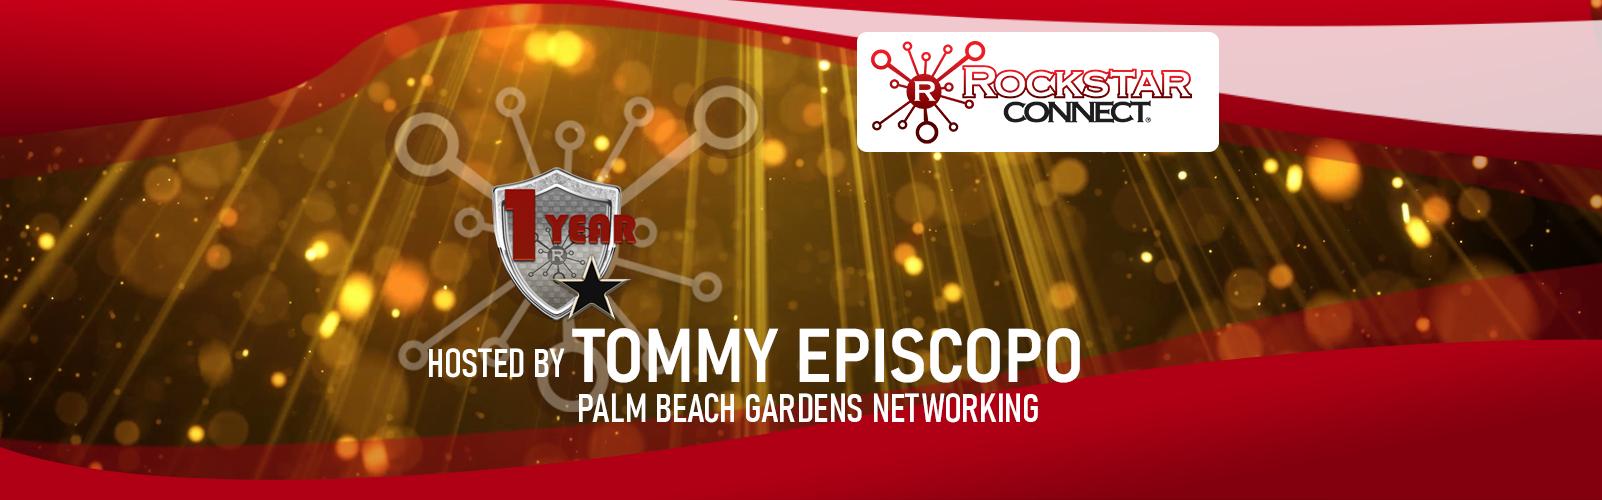 Free Palm Beach Gardens Rockstar Connect Networking Event March